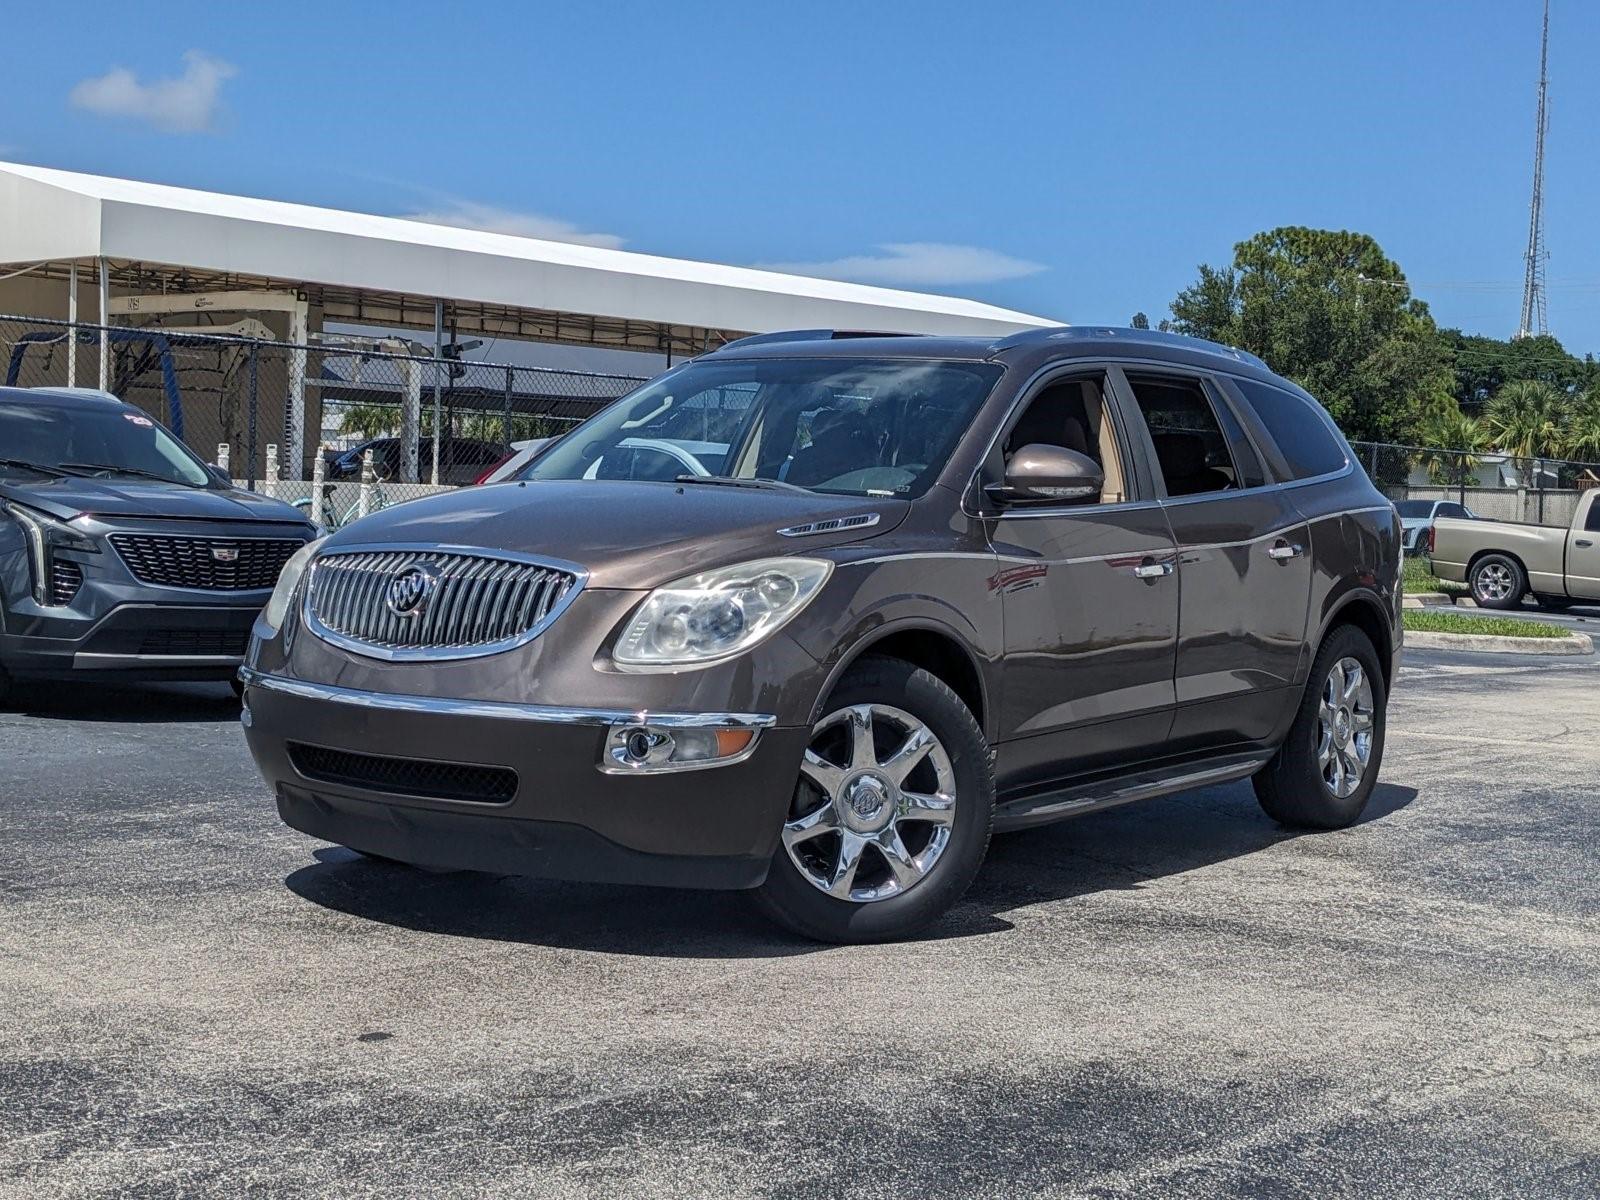 2009 Buick Enclave Vehicle Photo in WEST PALM BEACH, FL 33407-3296